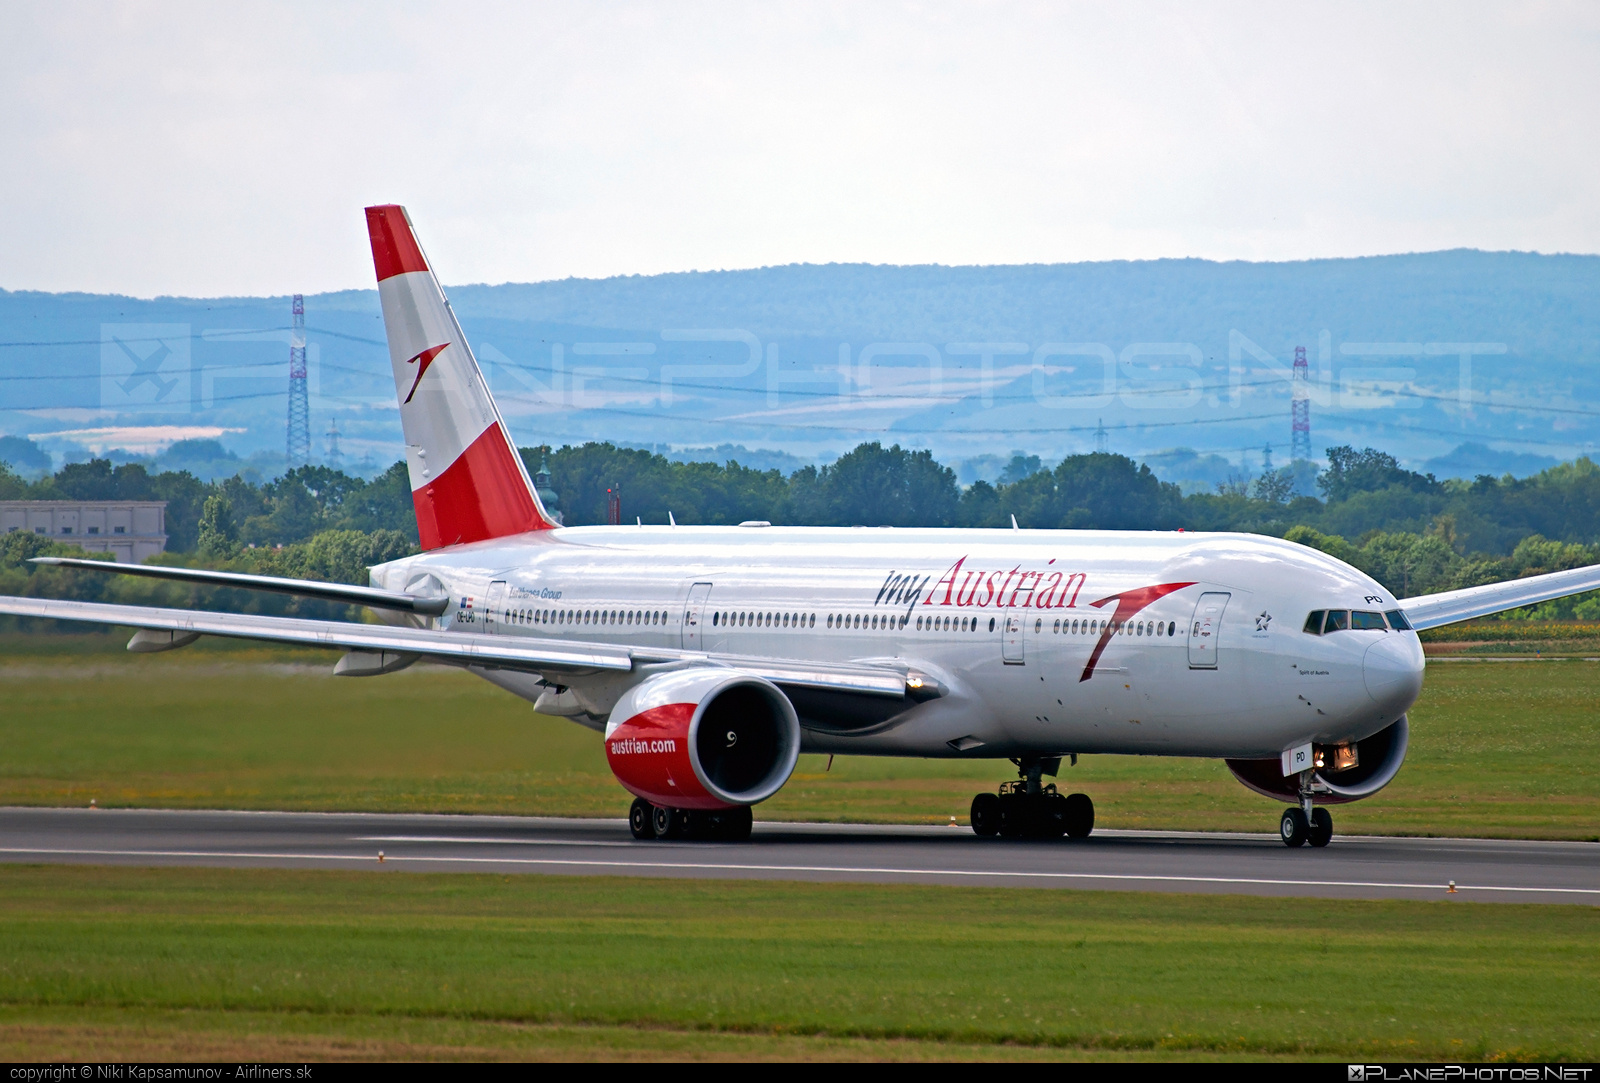 Boeing 777-200ER - OE-LPD operated by Austrian Airlines #austrian #austrianAirlines #b777 #b777er #boeing #boeing777 #tripleseven